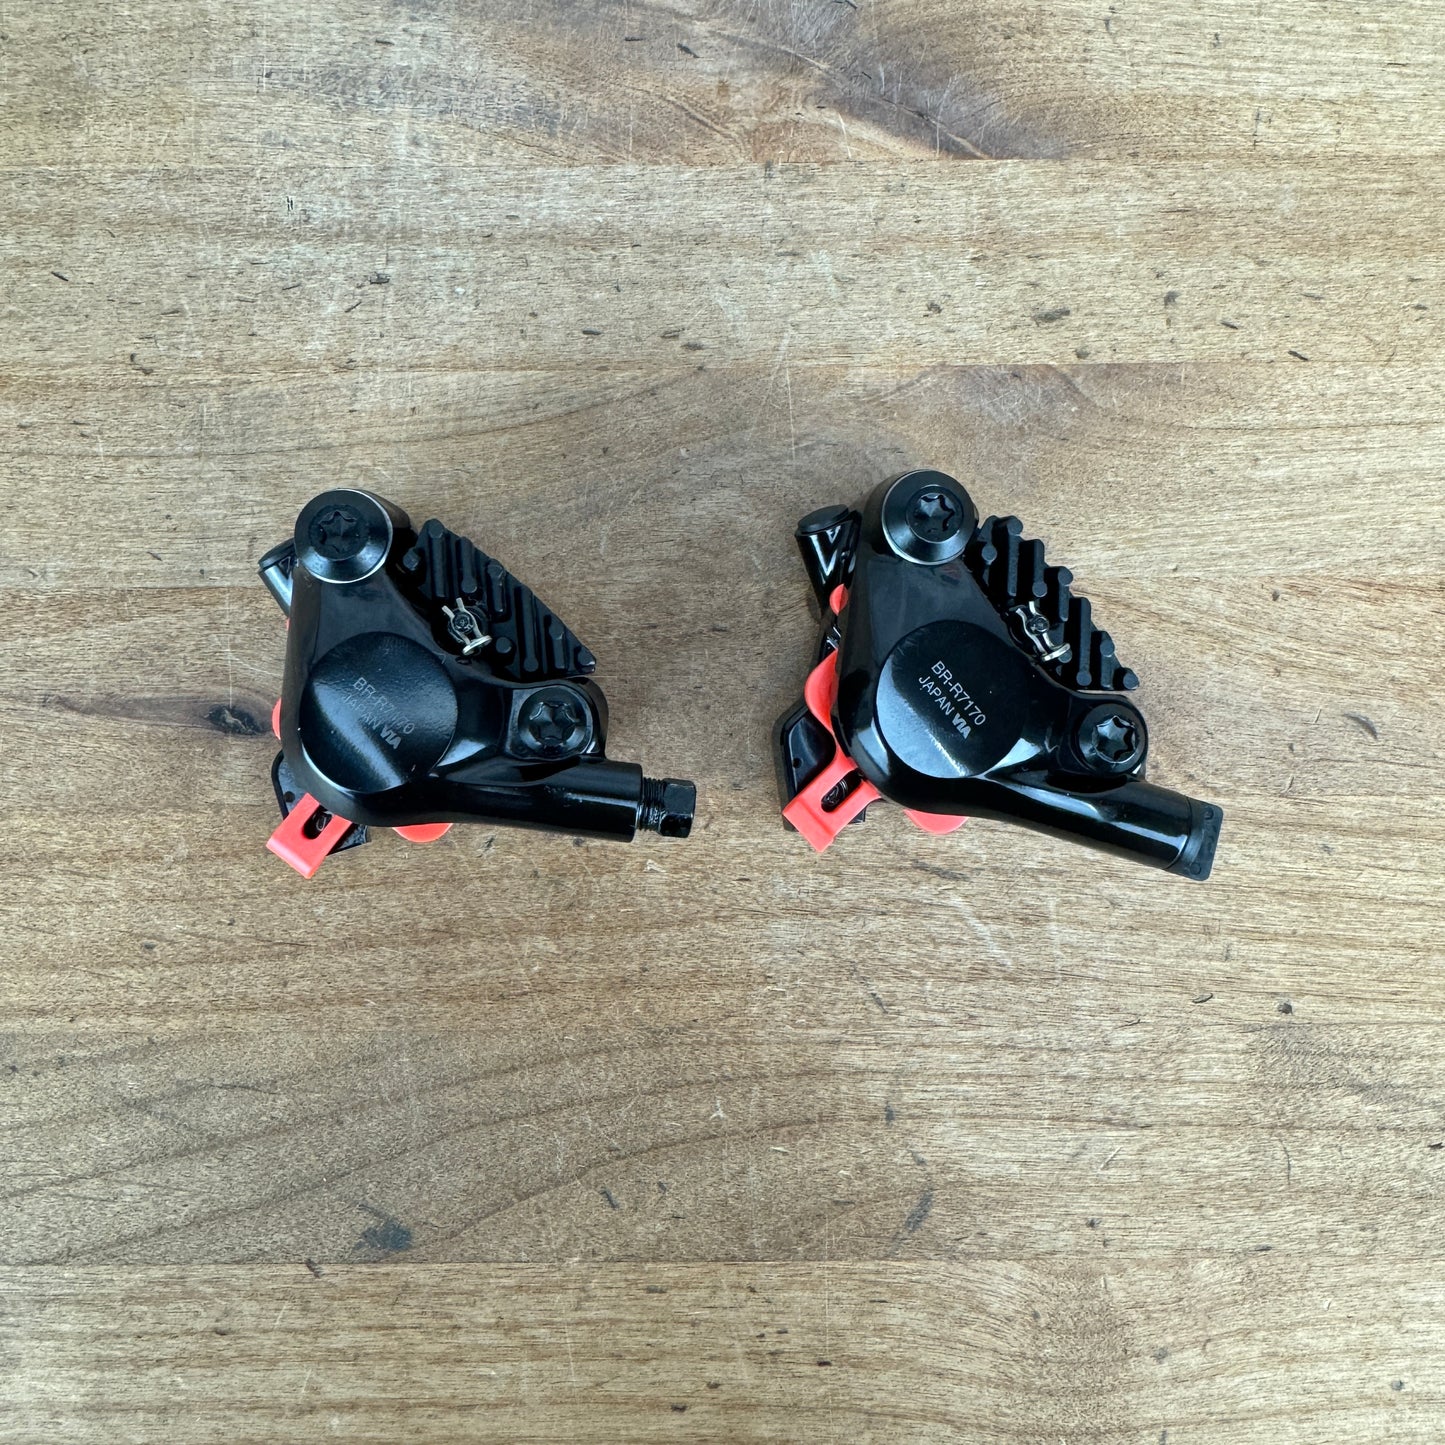 New Takeoff! Shimano 105 ST-R7170/BR-R7170 12-Spd Disc Brake Shifters + Calipers